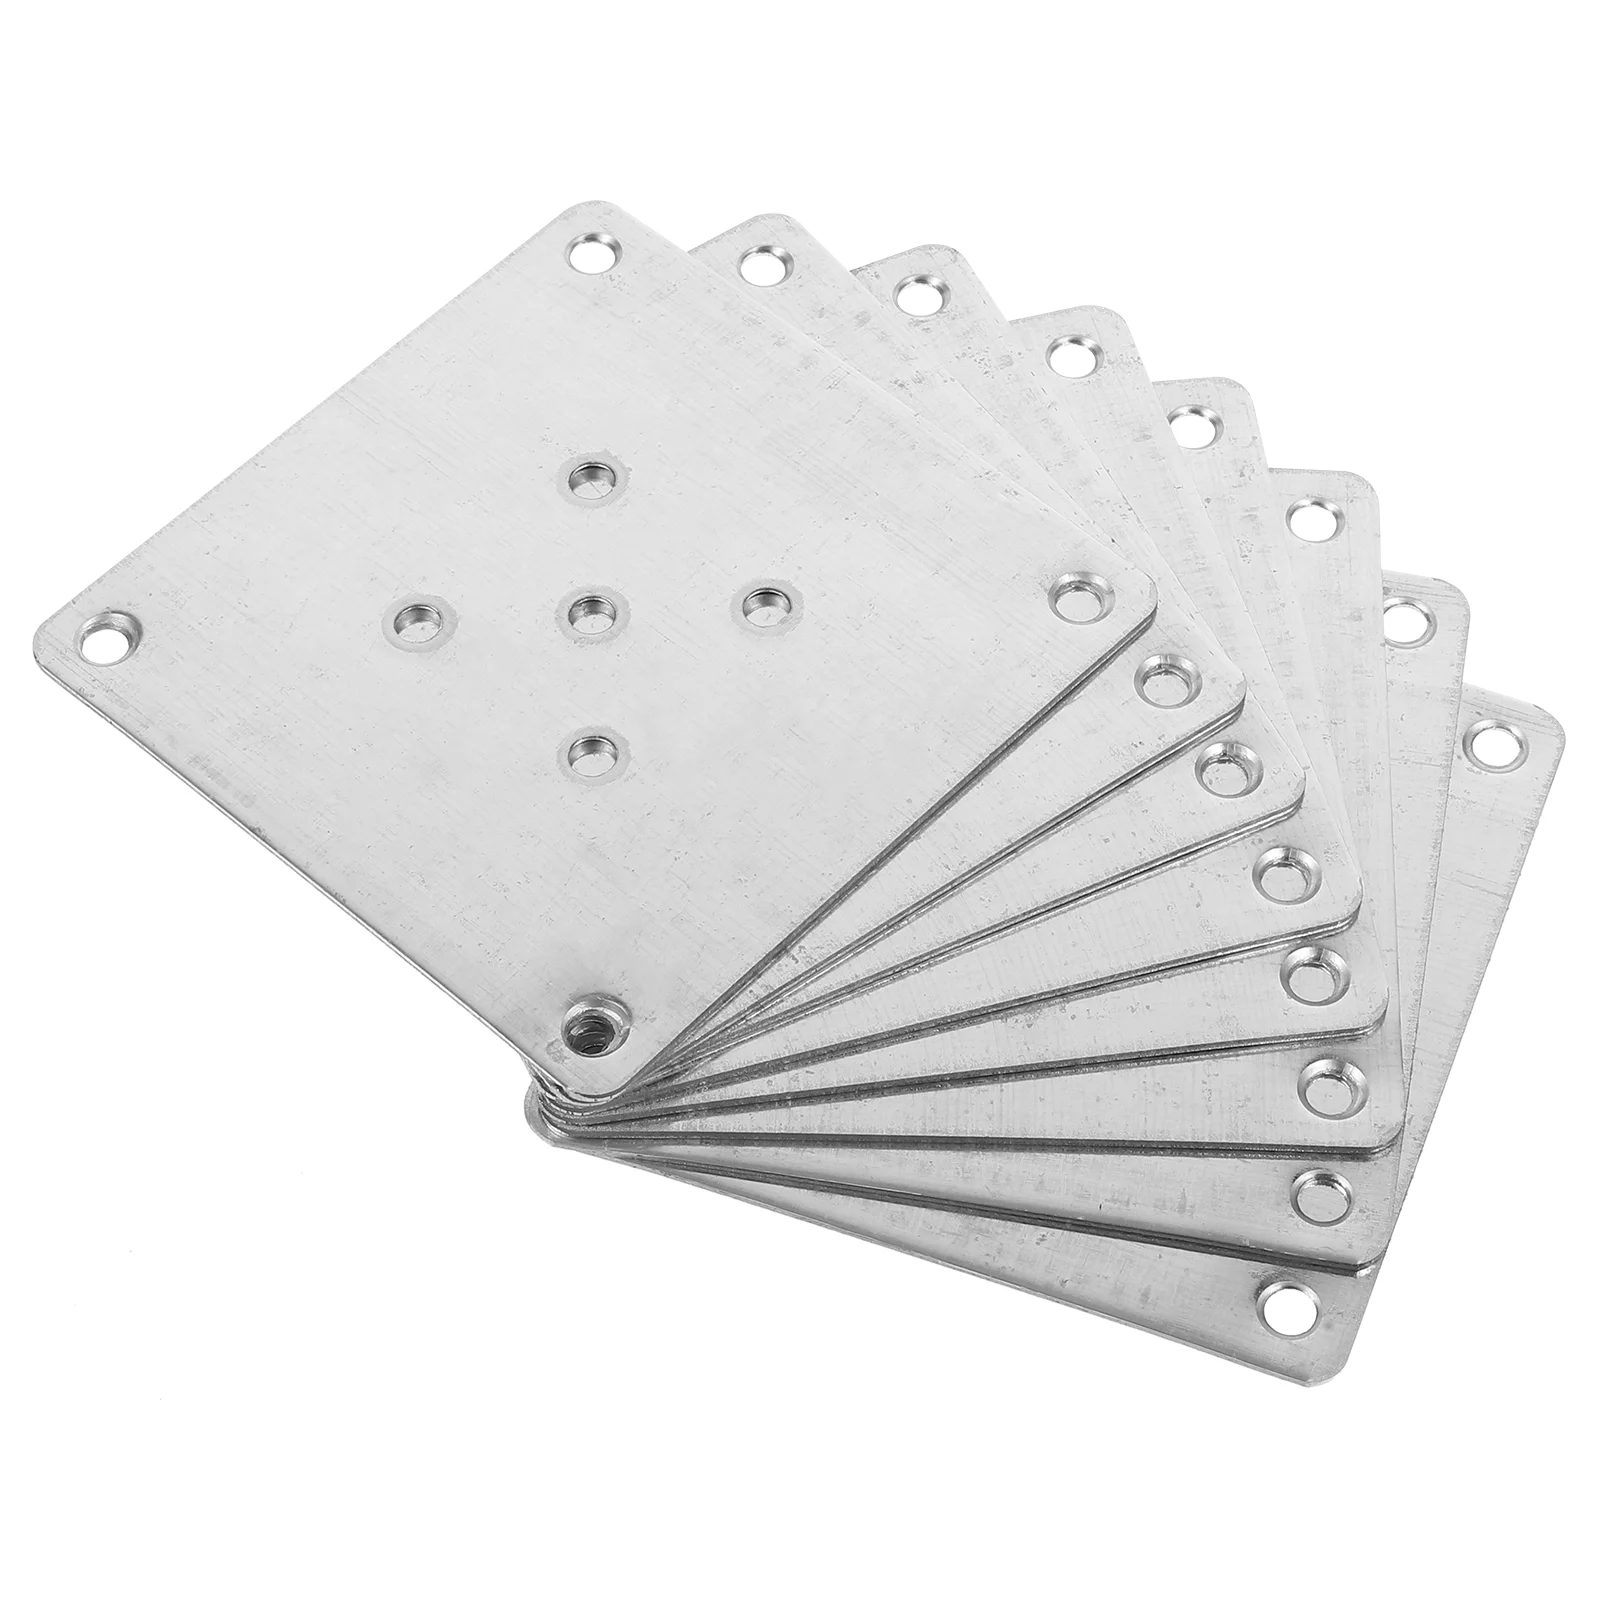 

8 Pcs Furniture Sofa Legs Thickened Metal Table Connection Fixing Piece Mounting Plates for Brackets Desk Attachment Couch